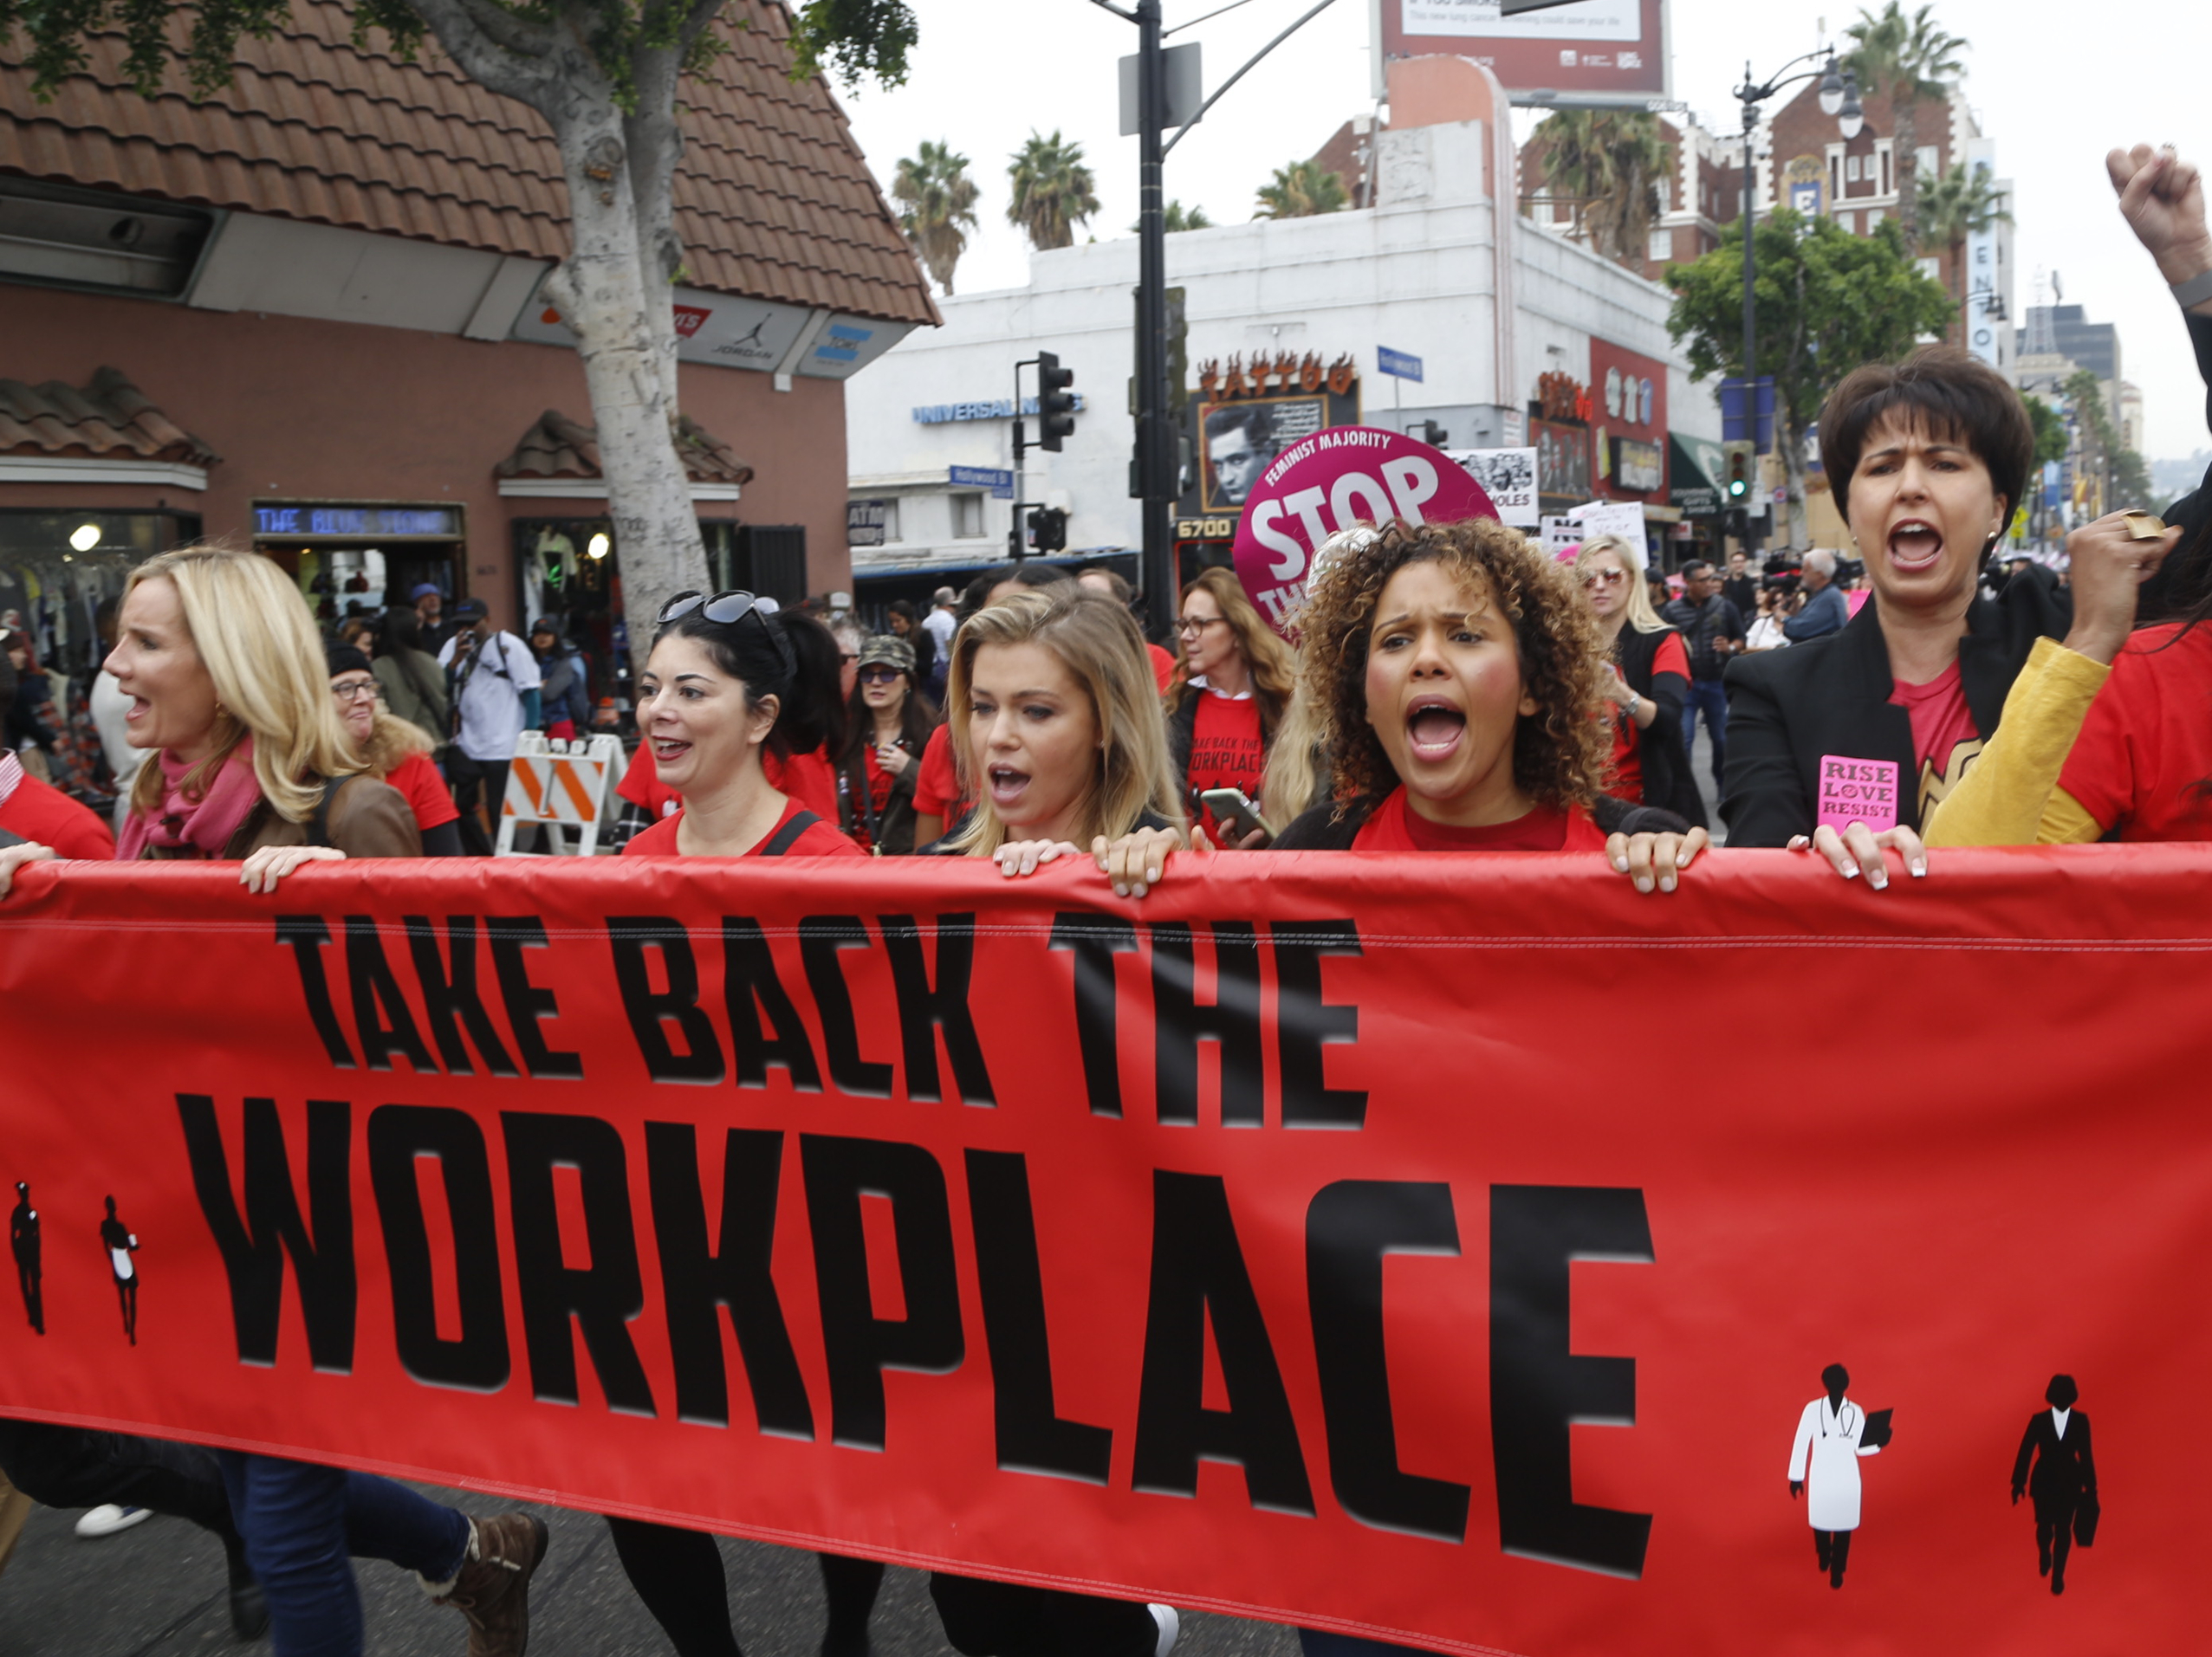 Participants march against sexual assault and harassment at the #MeToo March in the Hollywood section of Los Angeles last month.